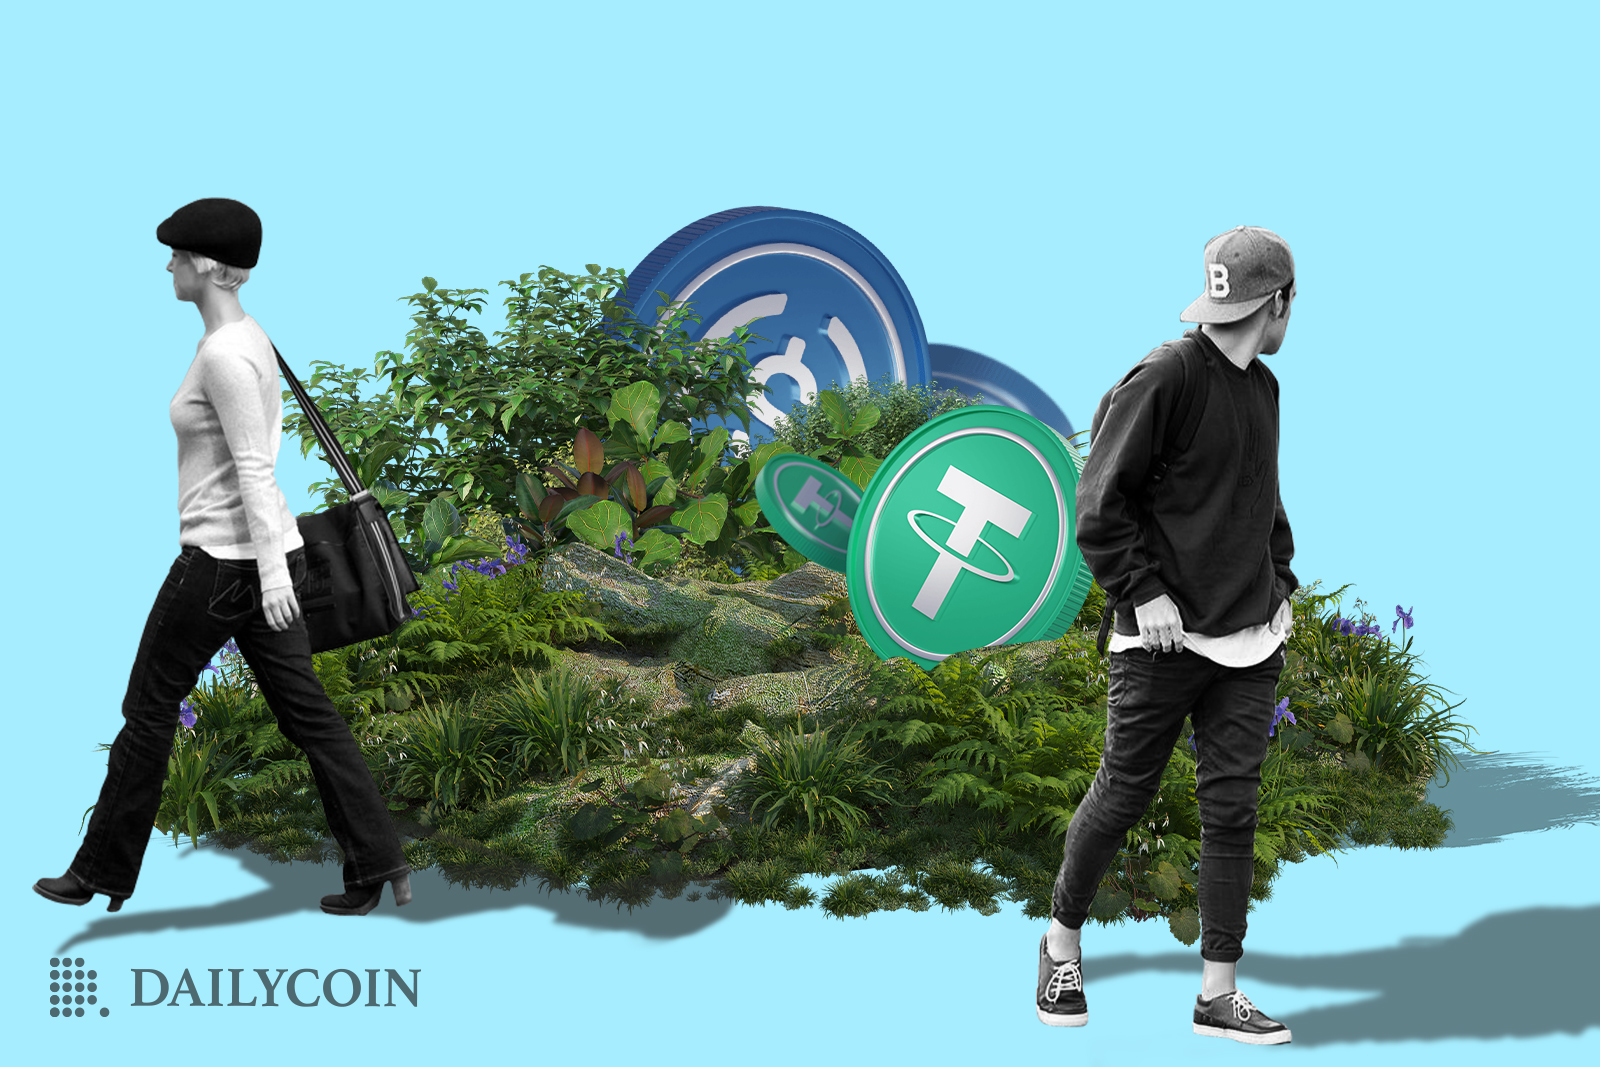 One person walking past stablecoins in a bush completely ignoring them while another person is looking back towards them, almost implying they have been forgotten